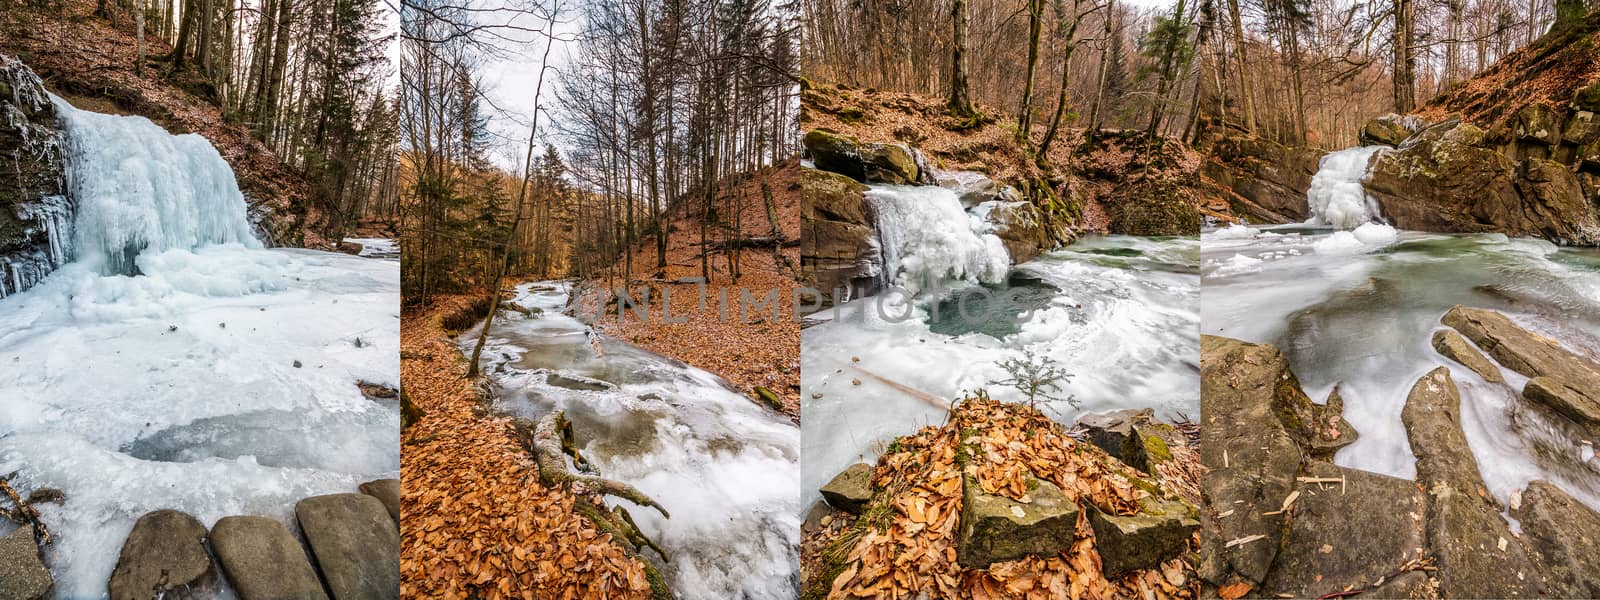 set of images with frozen waterfall on the river among the forest  in mountains